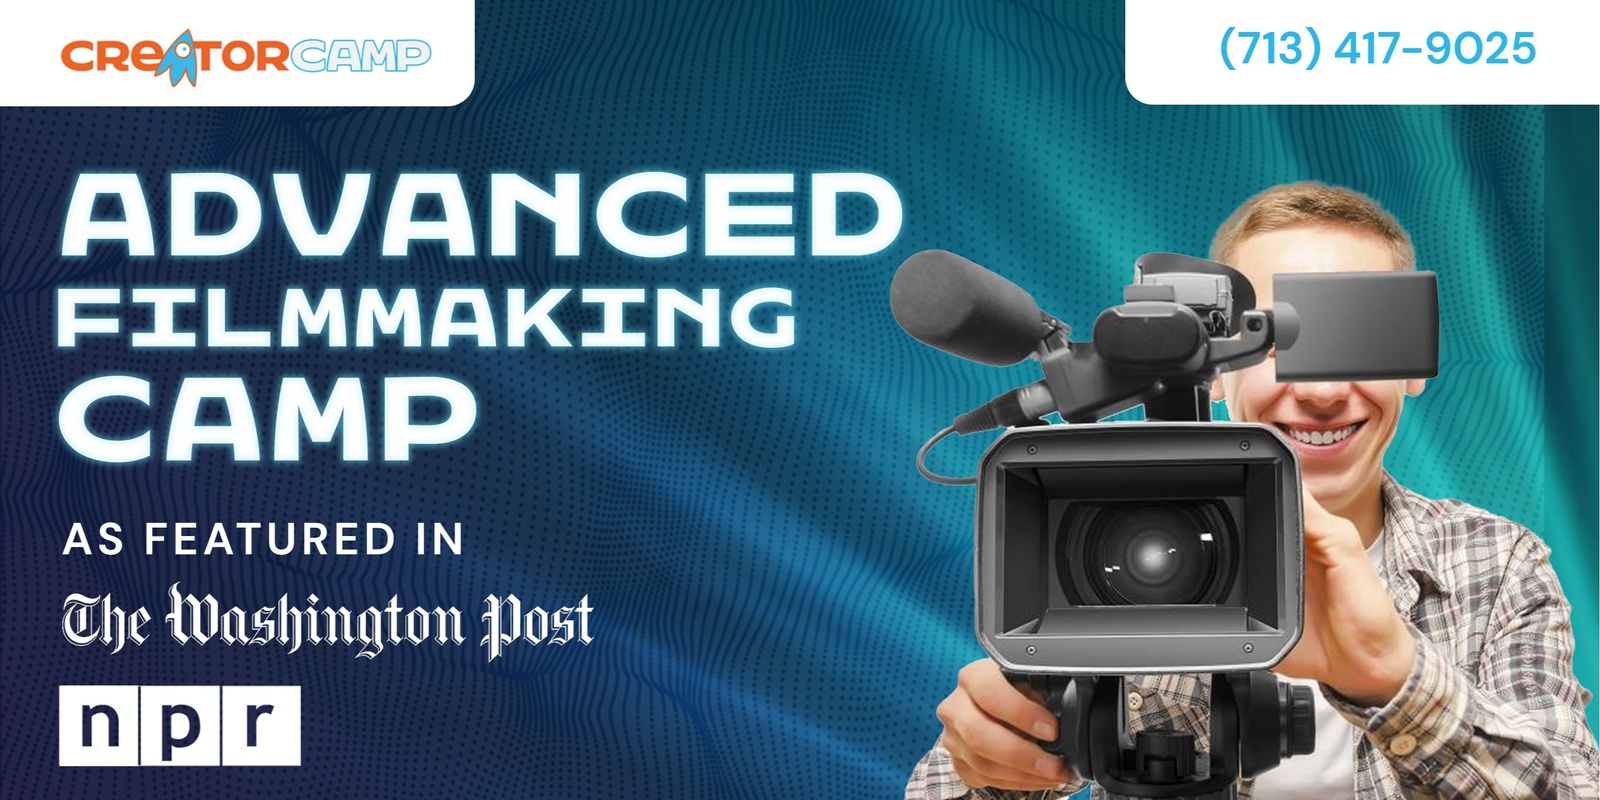 Banner image for Creator Camp Advanced Filmmaking Camp